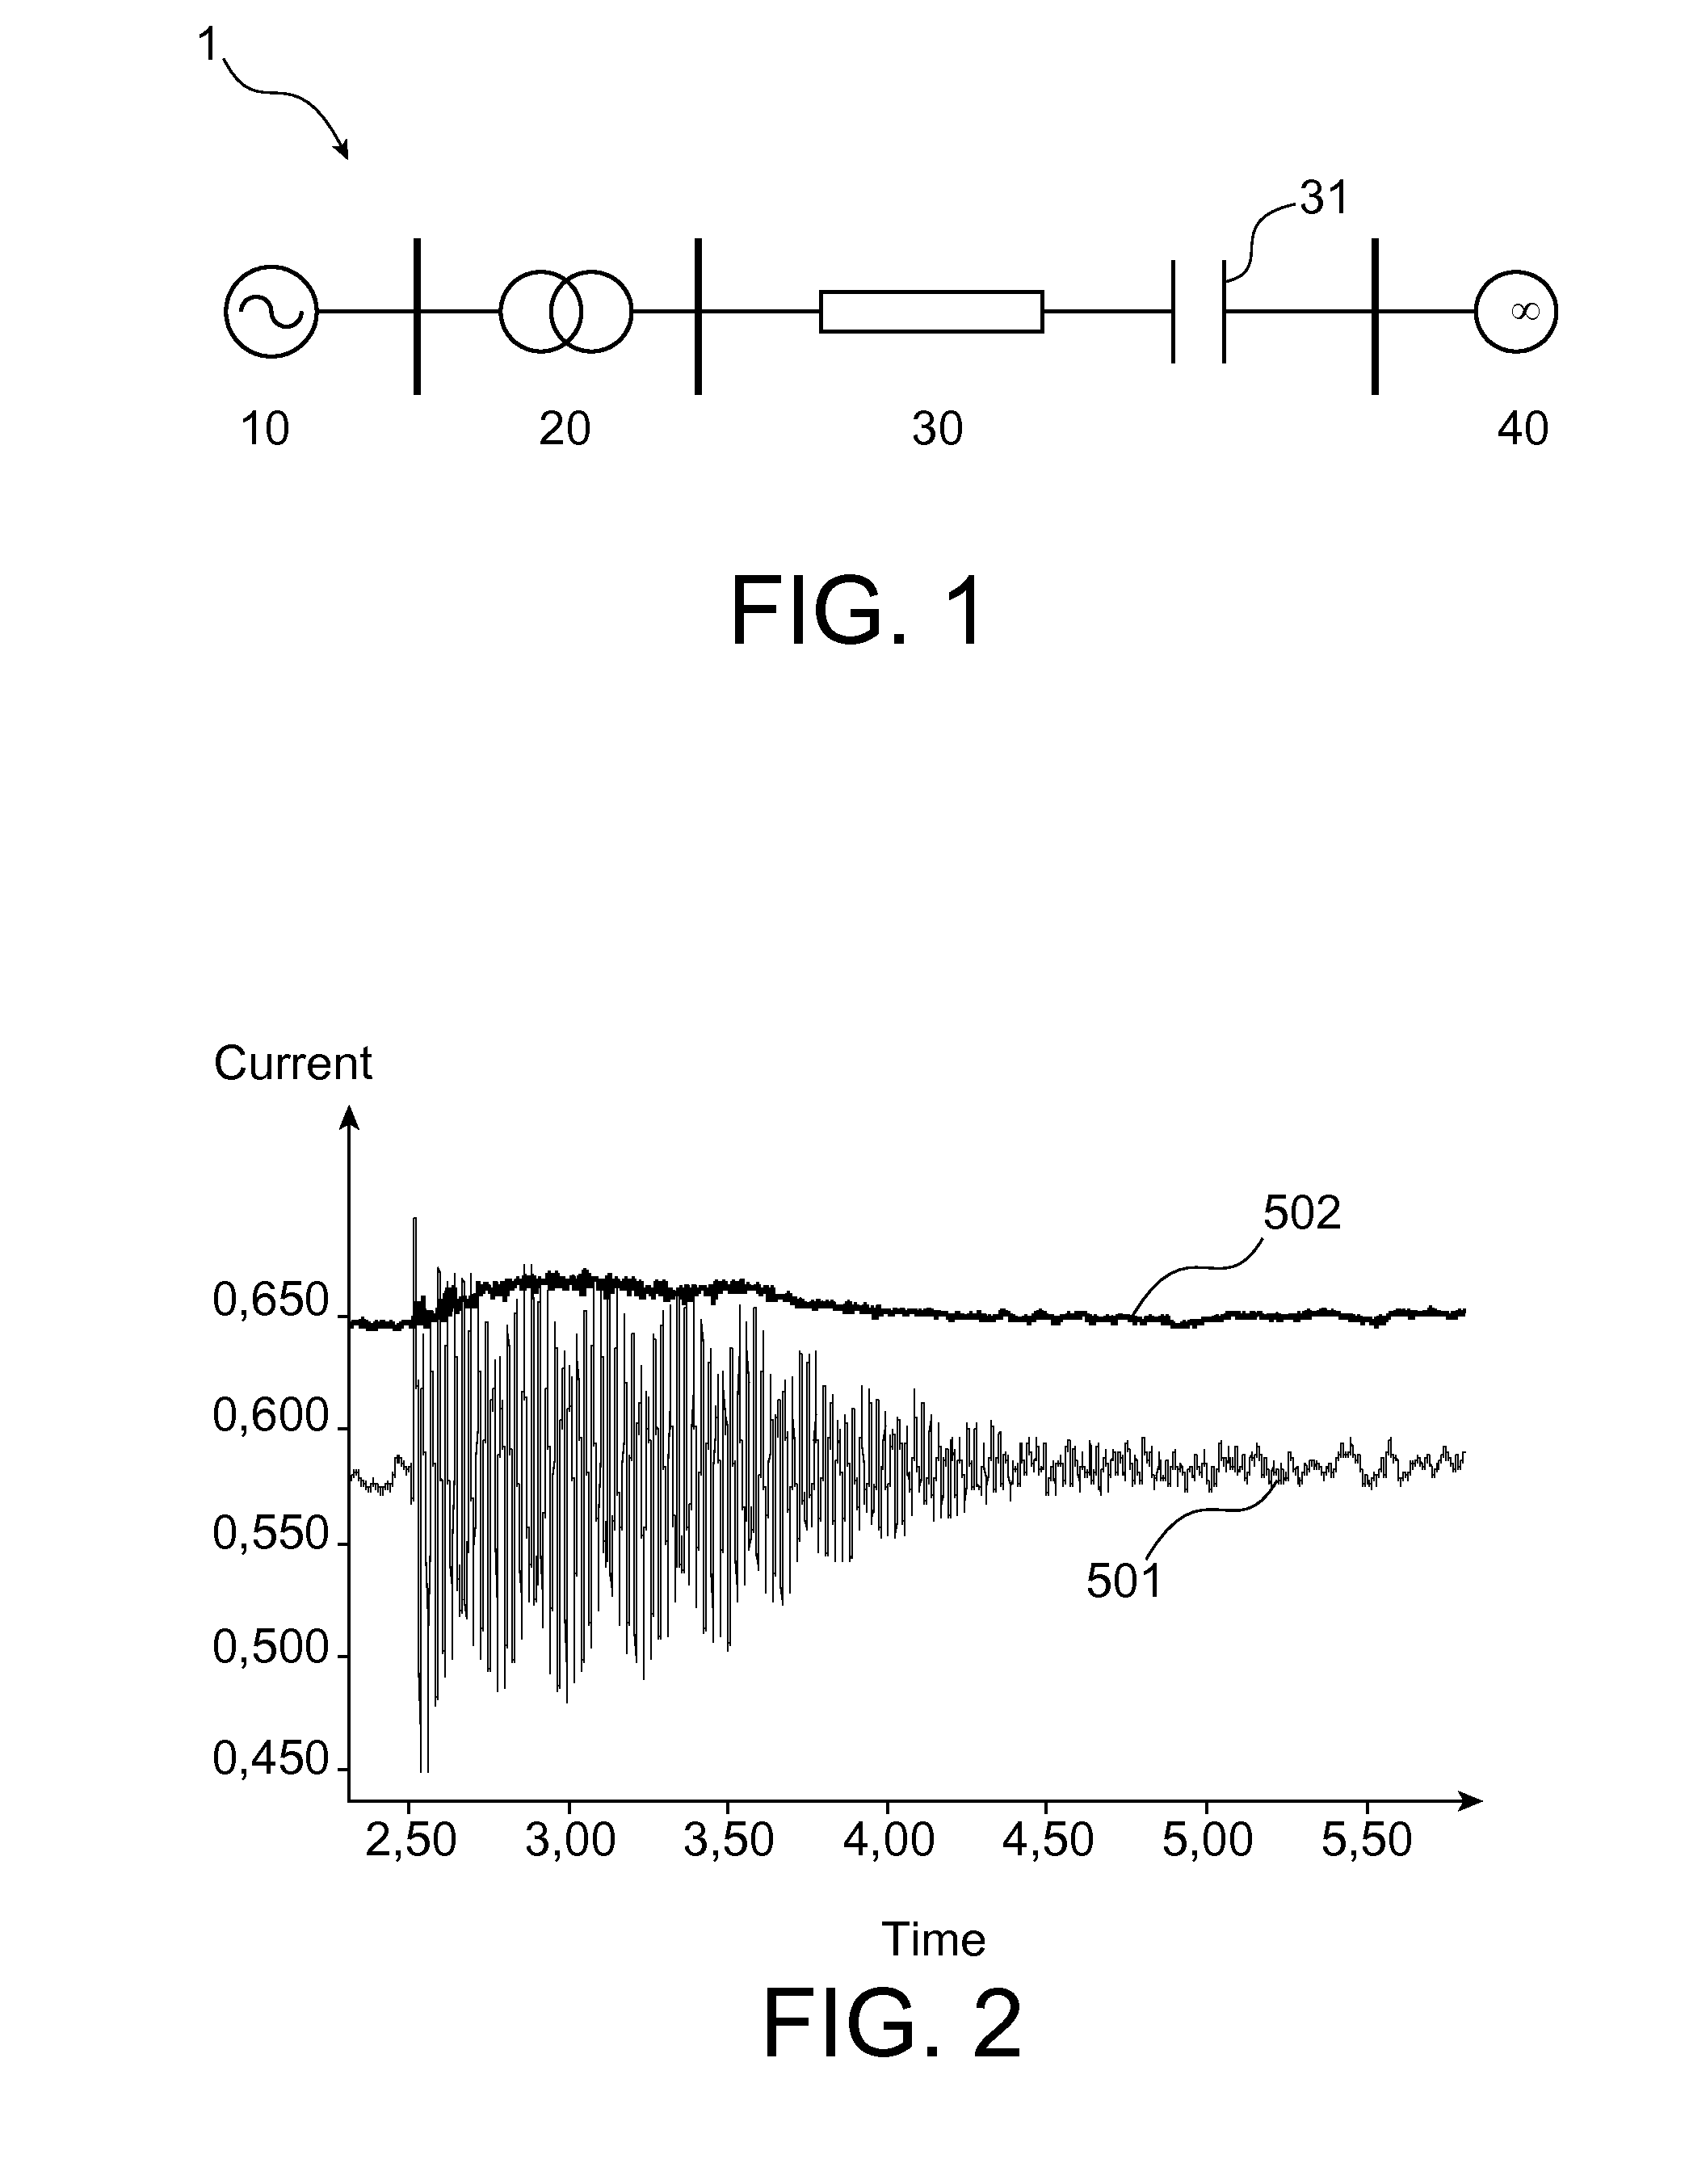 Sub-Synchronous Oscillation Damping By Shunt Facts Apparatus